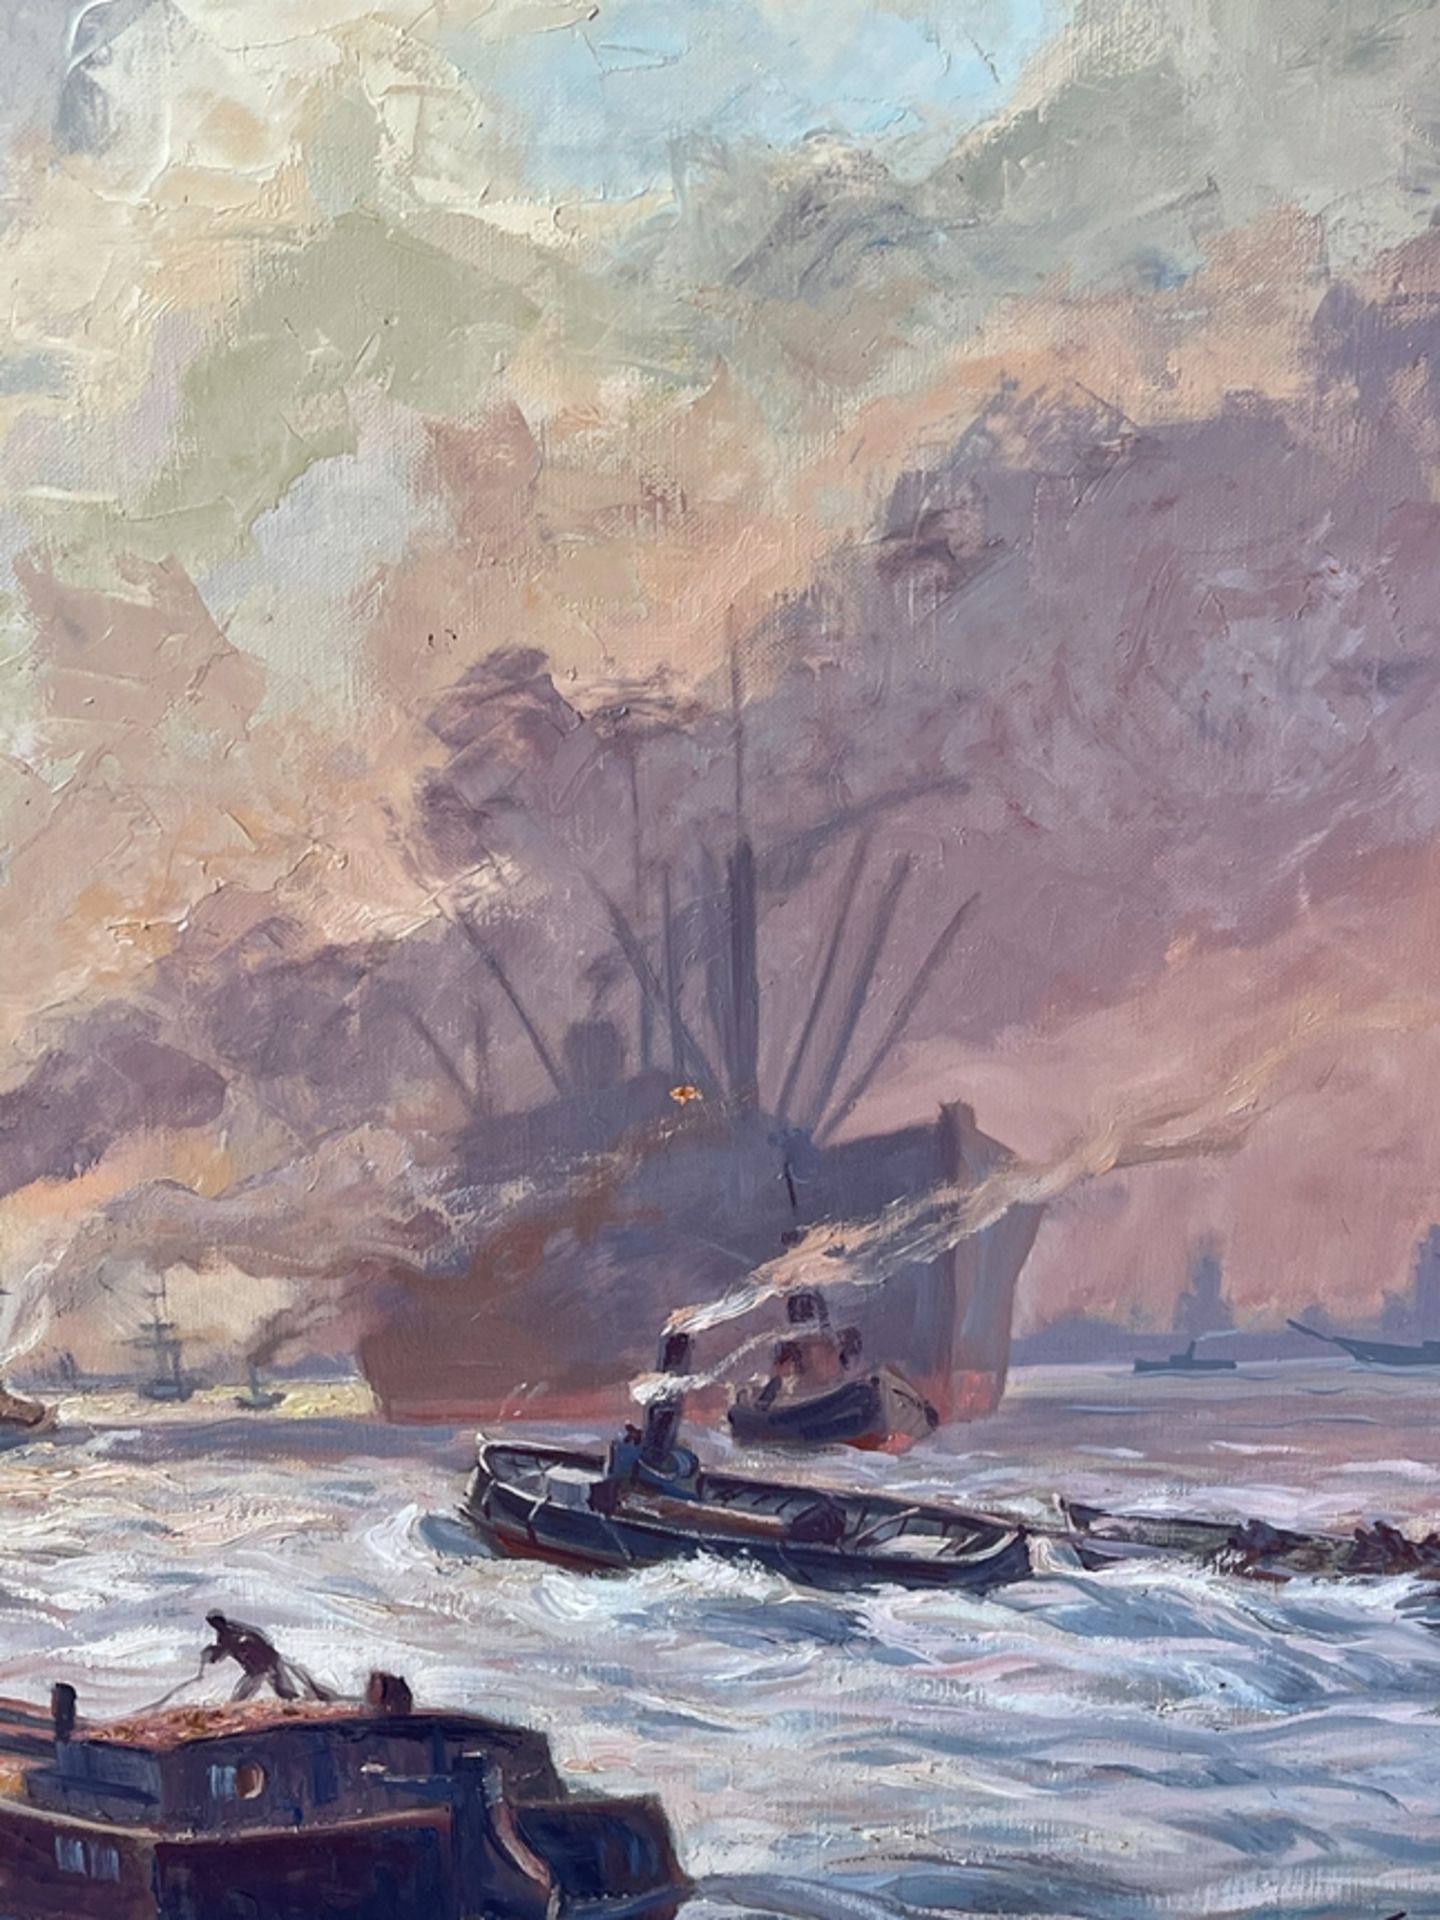 Painting harbor with ships - Image 2 of 5